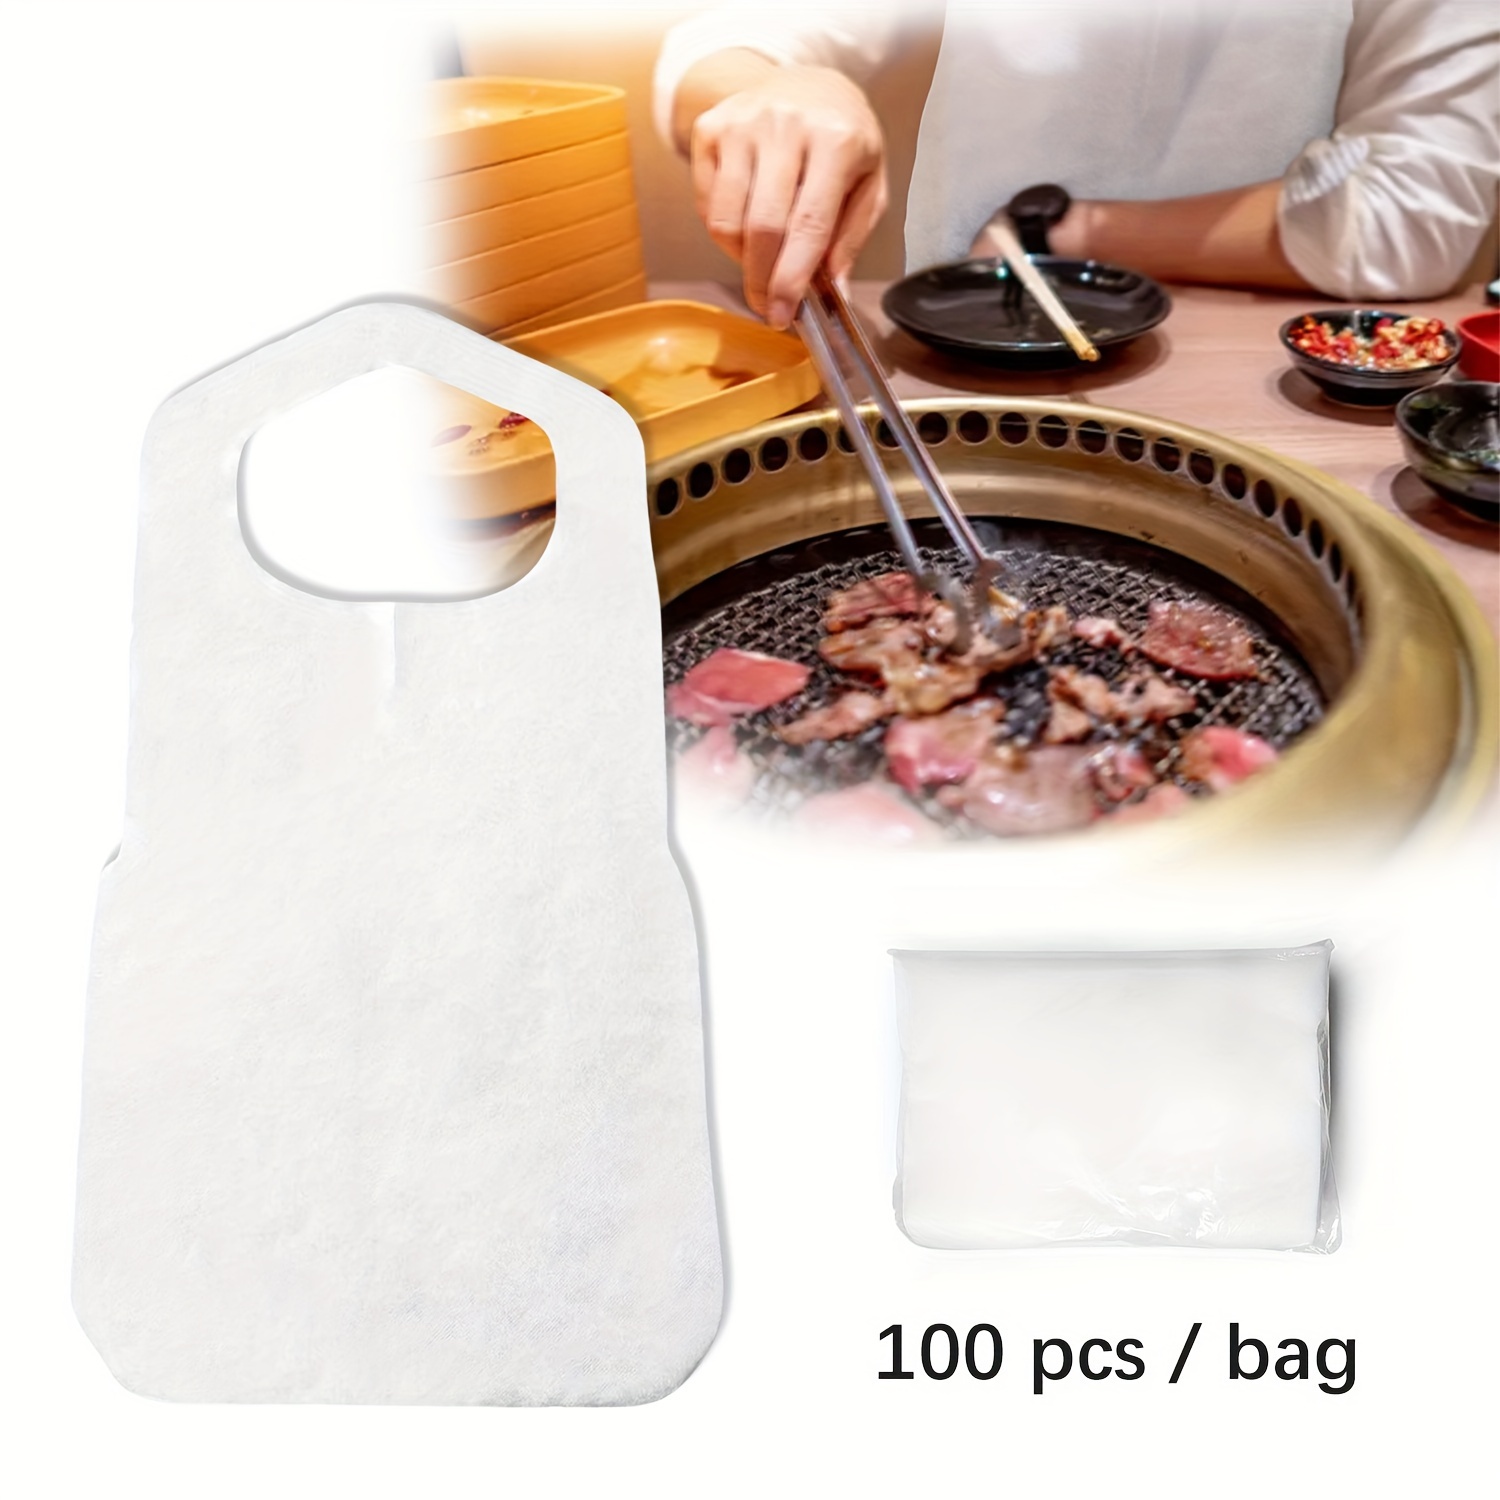 

100pcs Disposable Aprons, White Non-woven Fabric Light Sturdy Aprons For Serving, Painting, Barbecue, Arts Diy Crafts, Birthday Party, Family Dinners, Kitchen Accessories